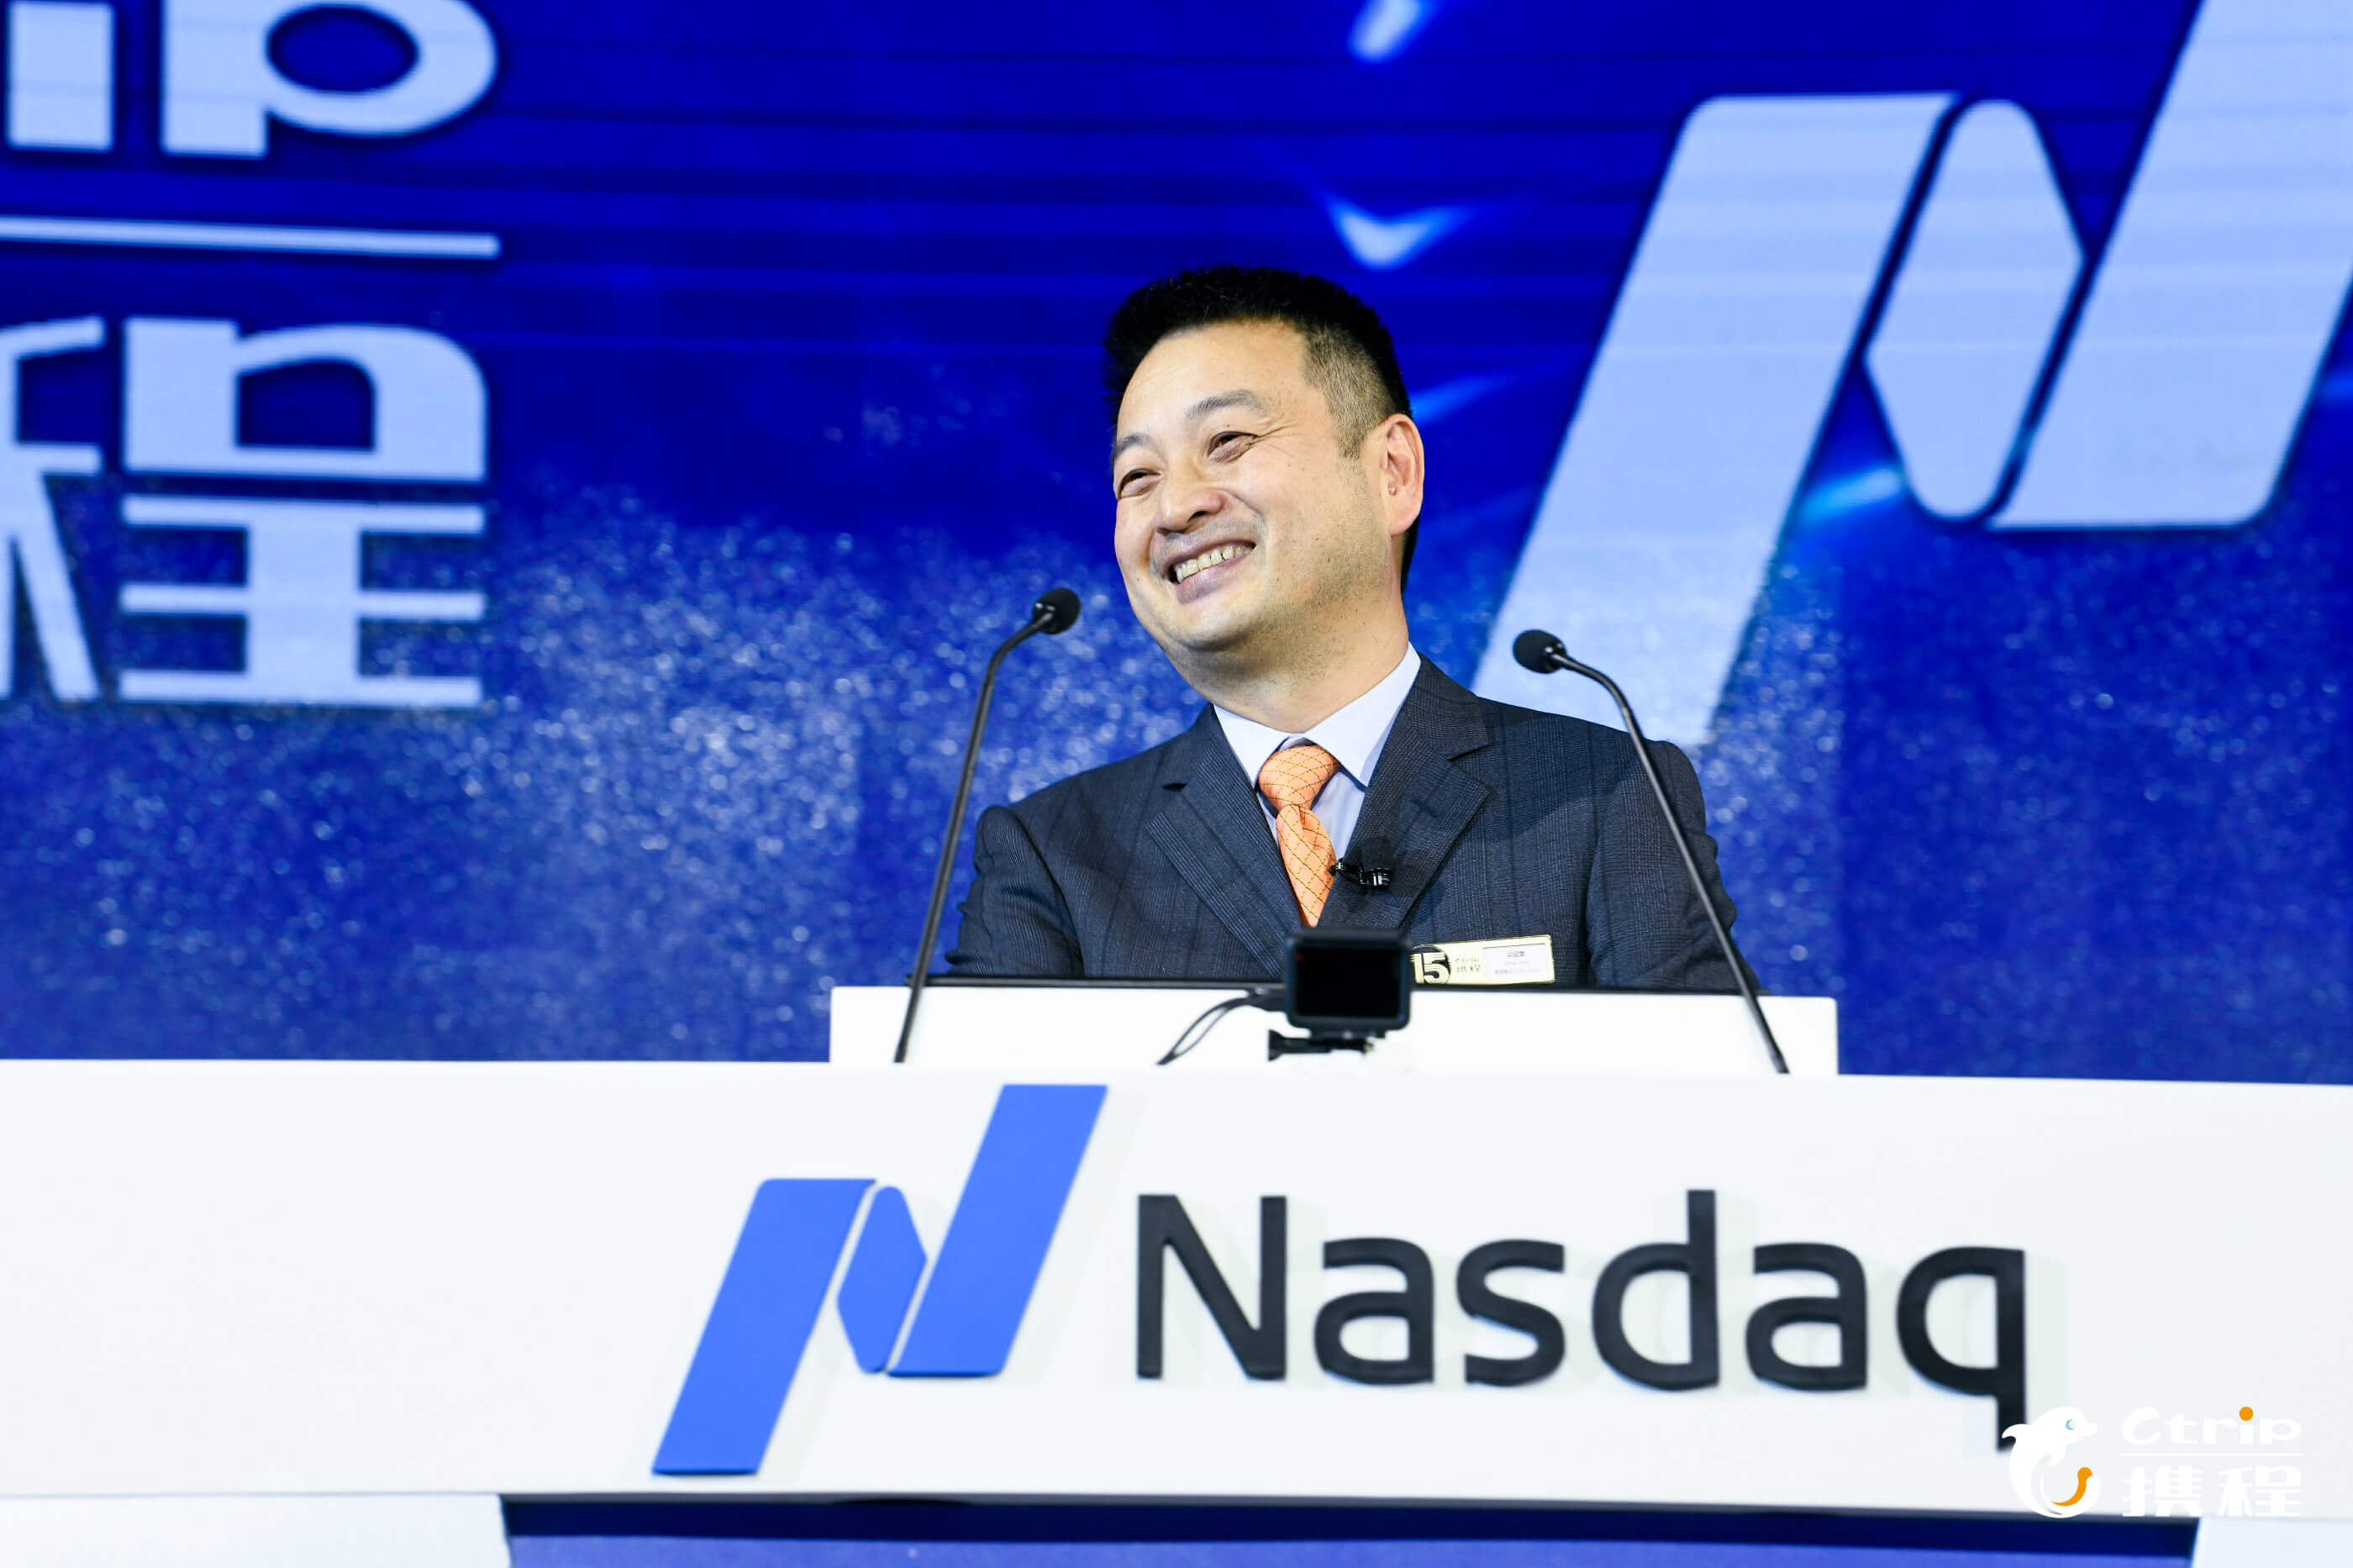 Trip.com chairman James Liang at a conference. Source: Ctrip.com